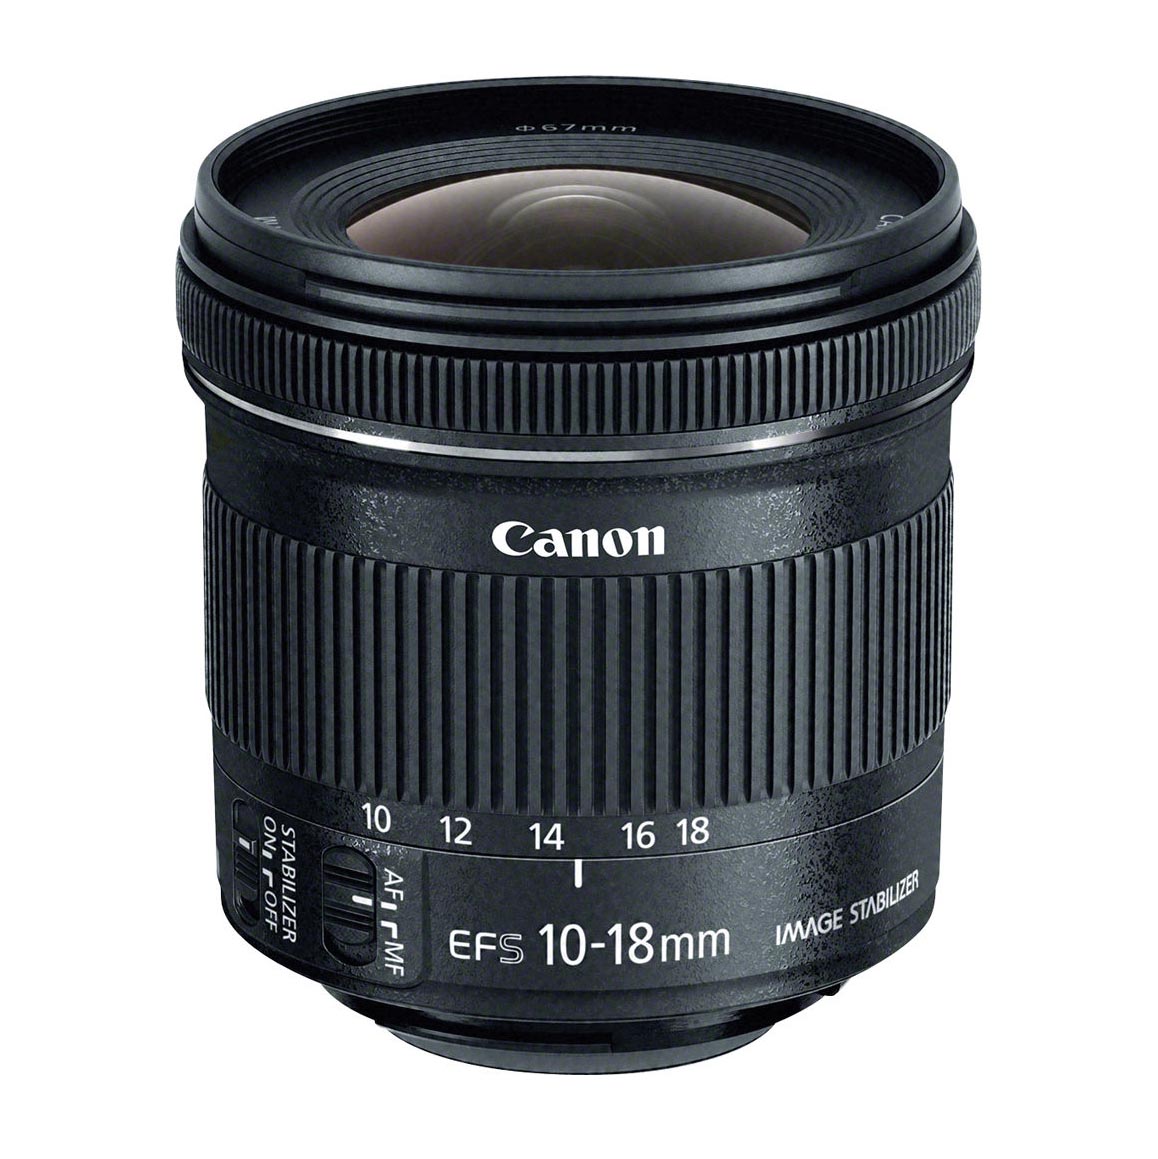 Объектив Canon EF-S 10-18mm f/4.5-5.6 IS STM, черный объектив canon rf s 55 210 f 5 7 1 is stm